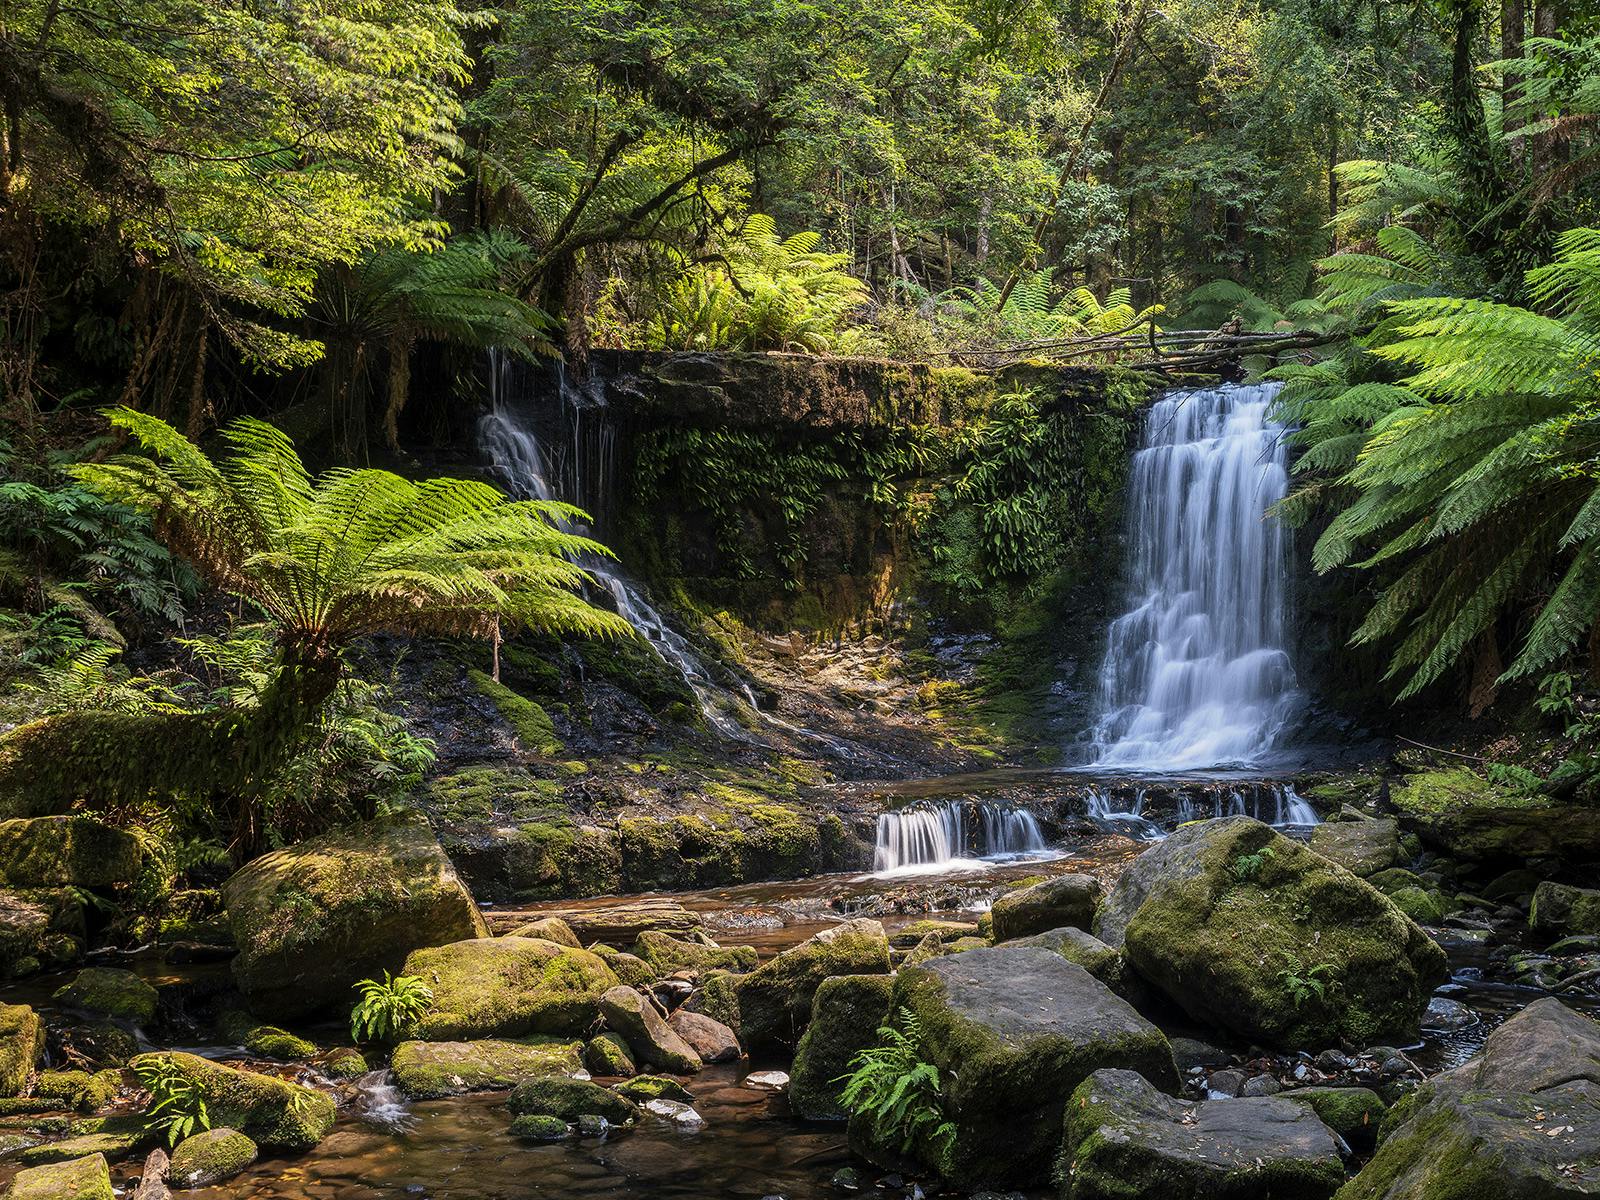 Horseshoe Falls is a special highlight of this photography day tour at Mt Field & Styx Valley